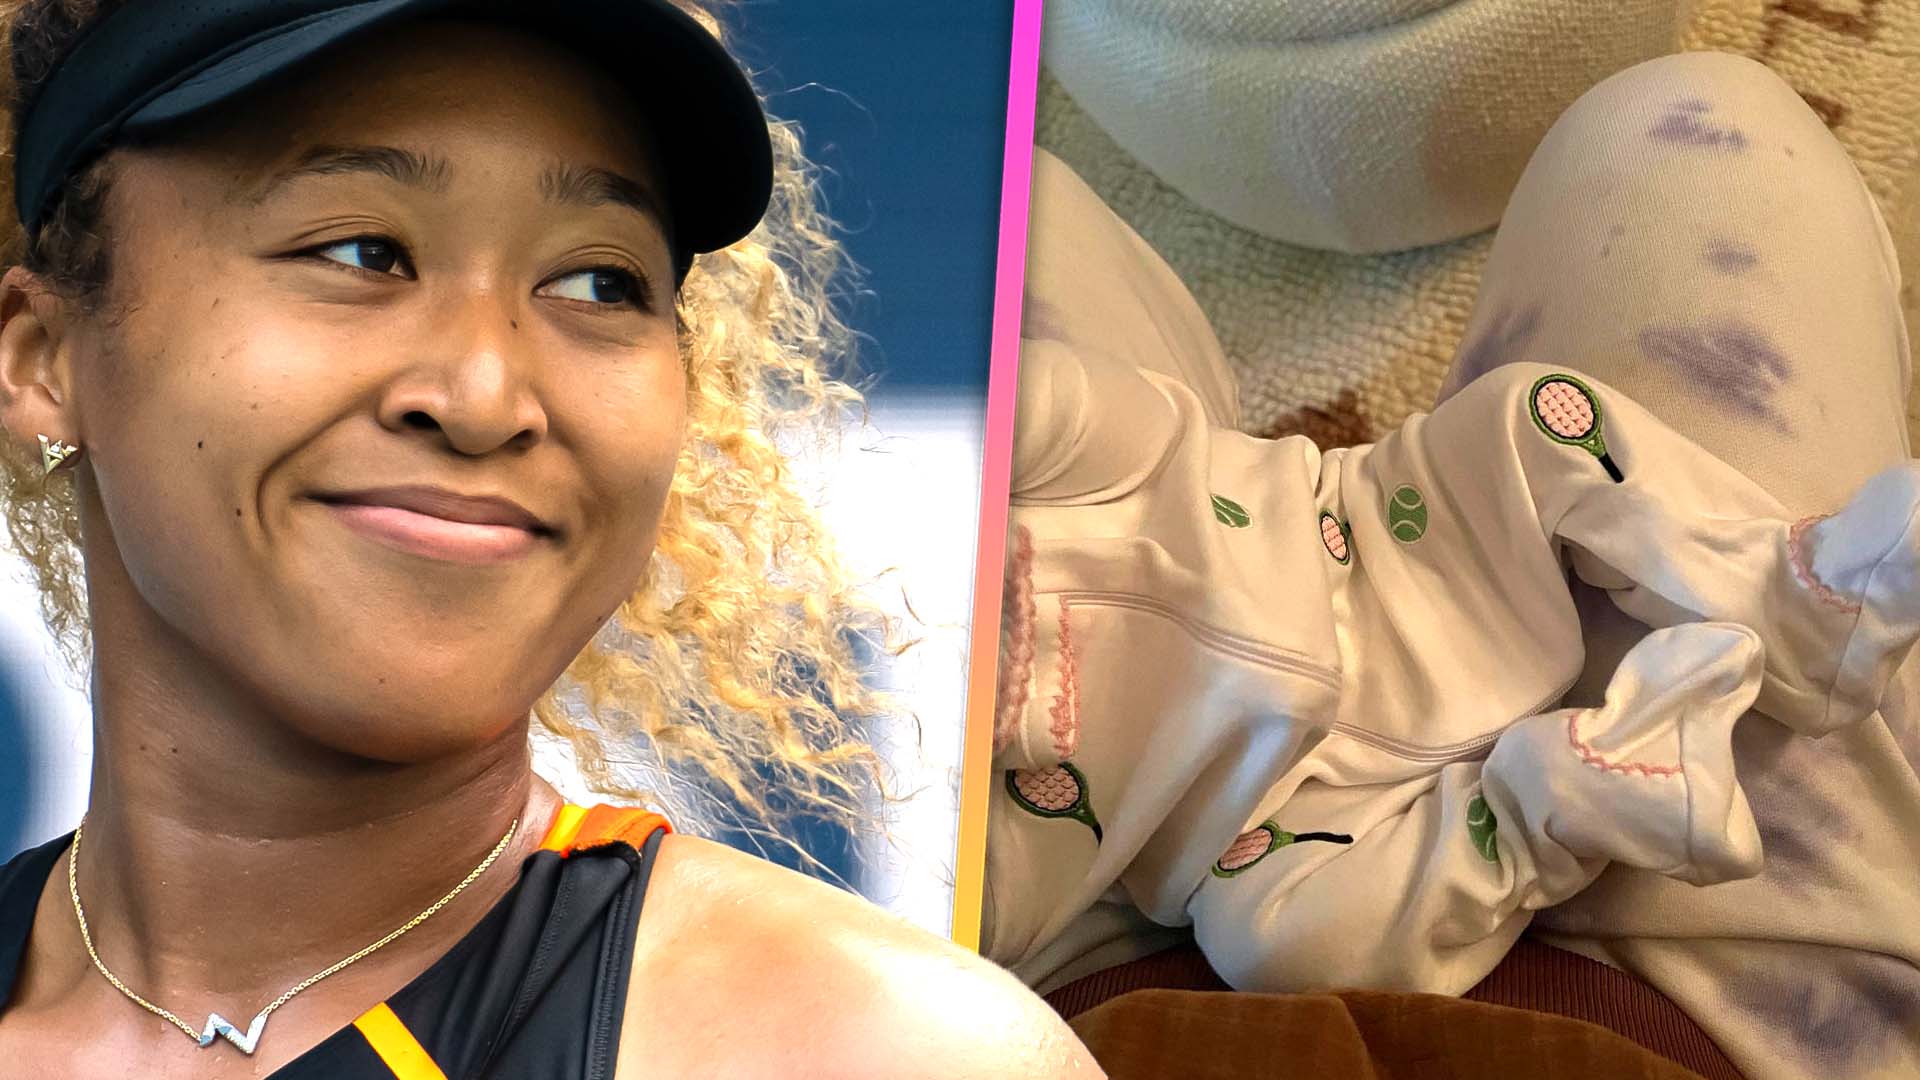 Naomi Osaka serves as her own best advert for new signature